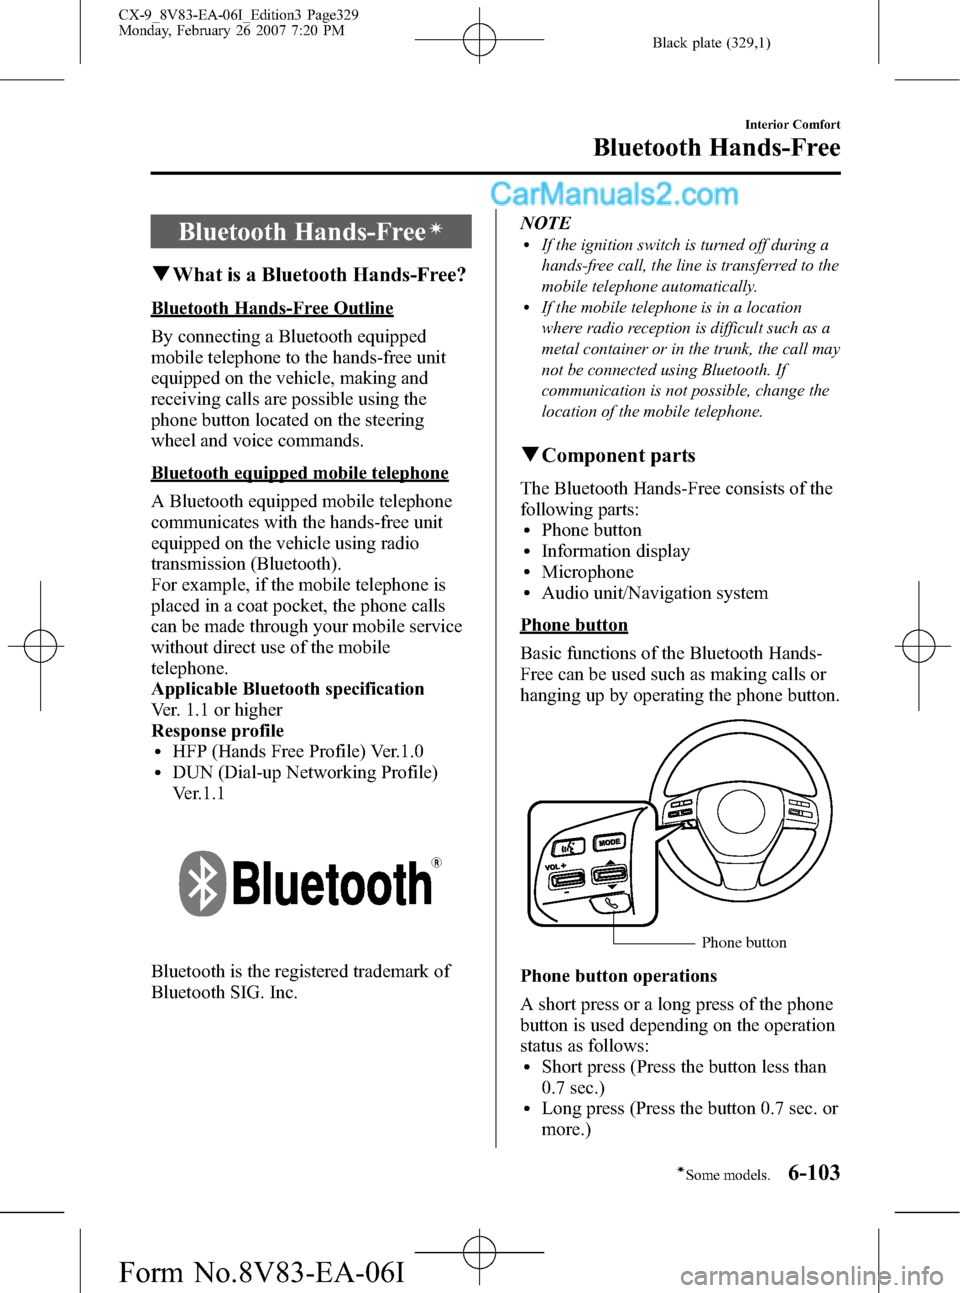 MAZDA MODEL CX-9 2007  Owners Manual (in English) Black plate (329,1)
Bluetooth Hands-Freeí
qWhat is a Bluetooth Hands-Free?
Bluetooth Hands-Free Outline
By connecting a Bluetooth equipped
mobile telephone to the hands-free unit
equipped on the vehi